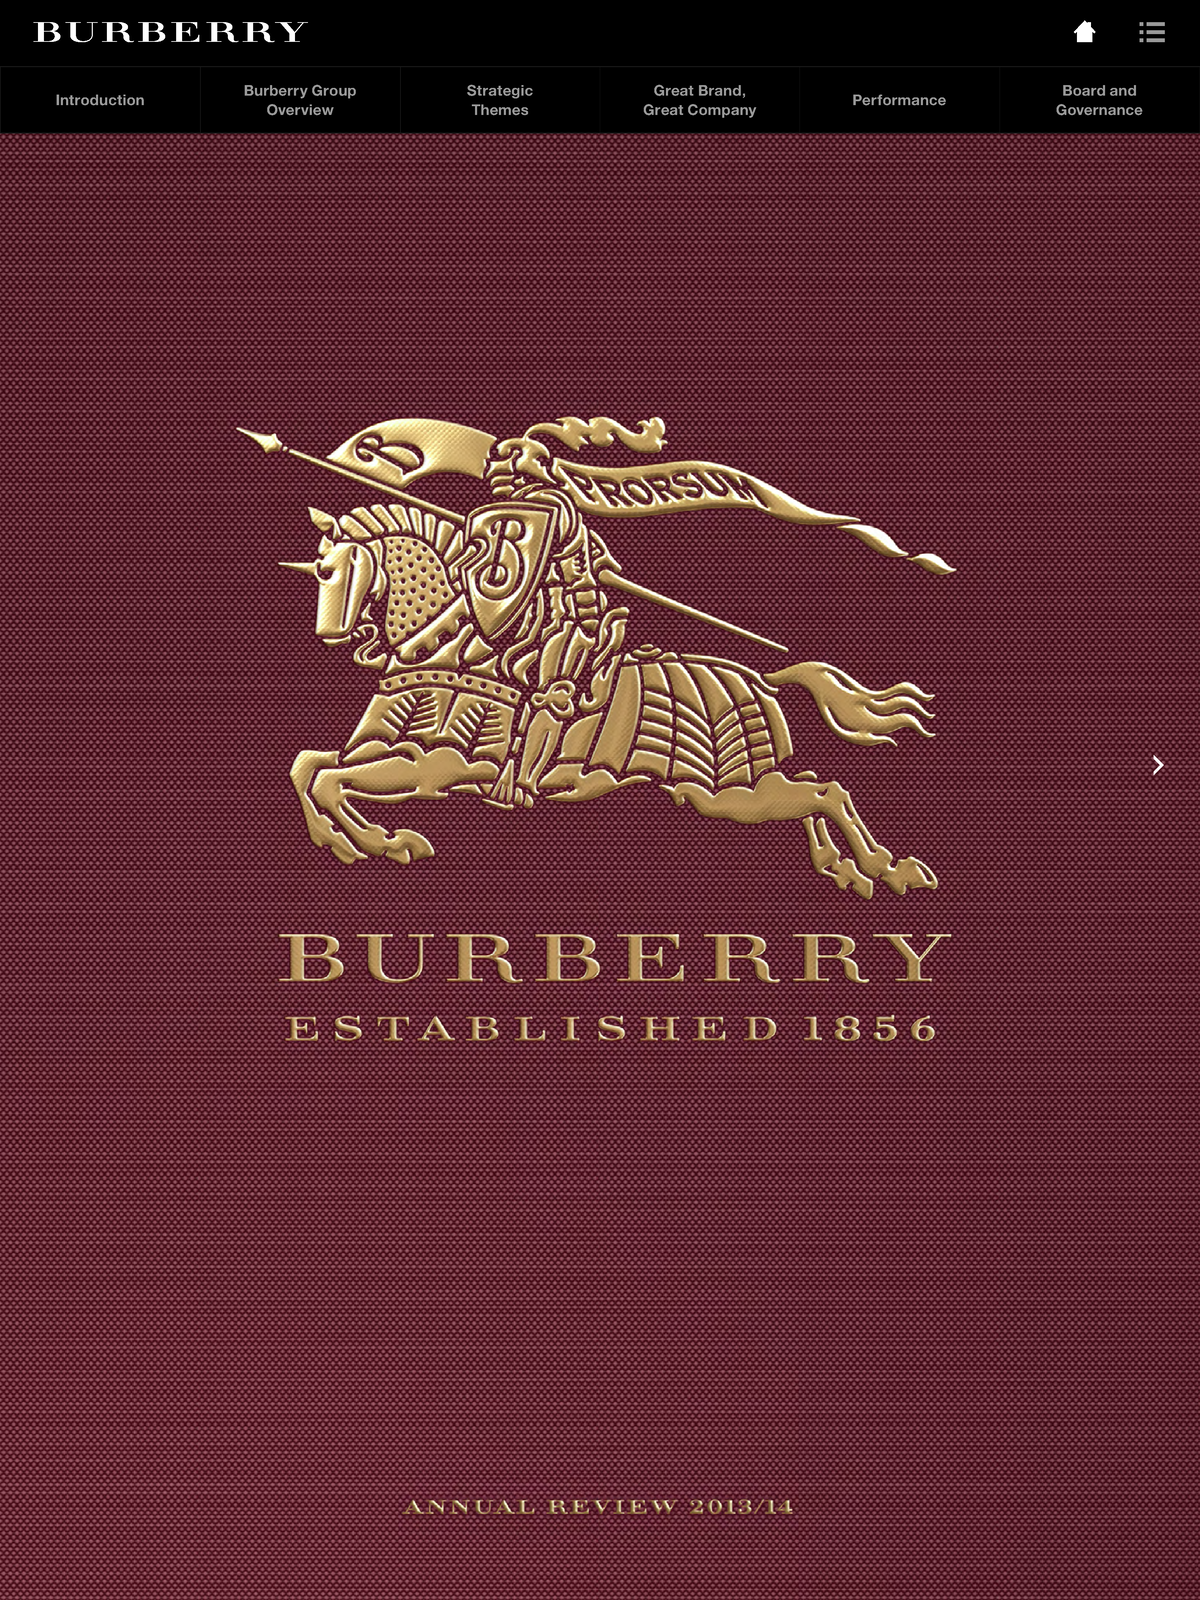 Report burberry-annual-rev - Introduction Board and Governance Burberry  Group Overview Strategic - Studocu